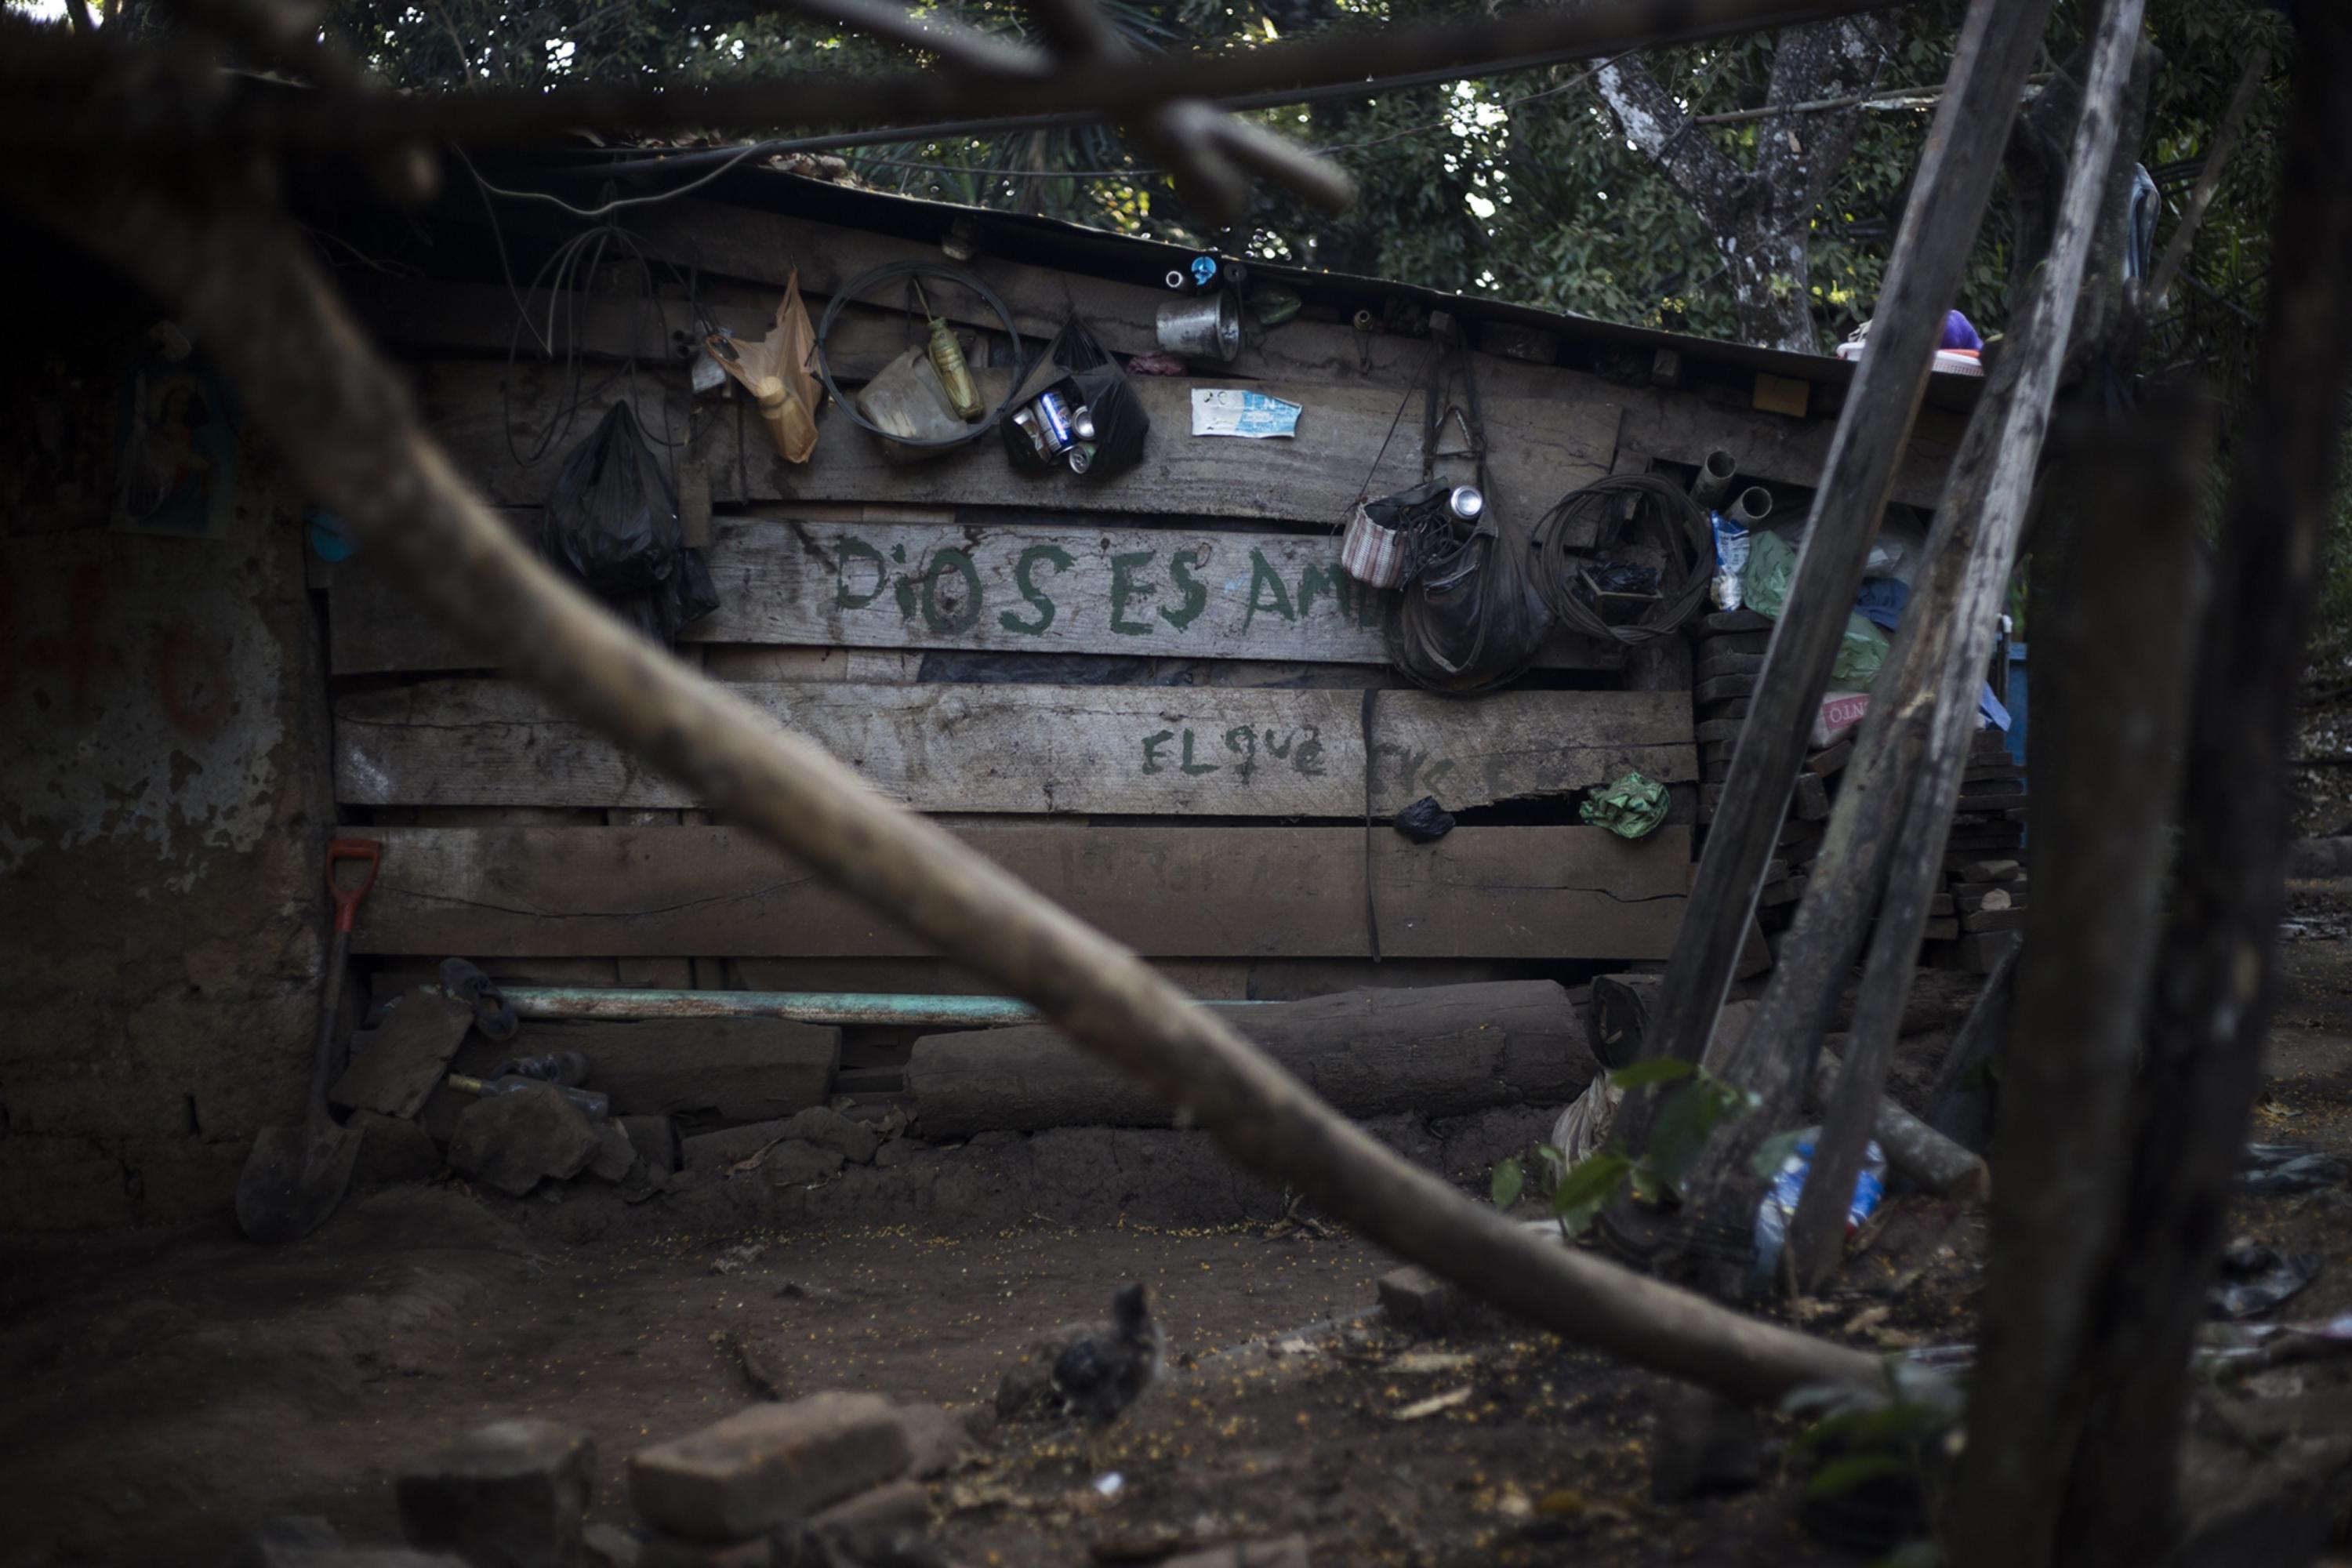 The La Labor stream supplies 500 families in an area protected by the Ministry of the Environment and Natural Resources since 2018. Residents living in precarious homes of wood, sheet metal, adobe, and cement now defend their water.